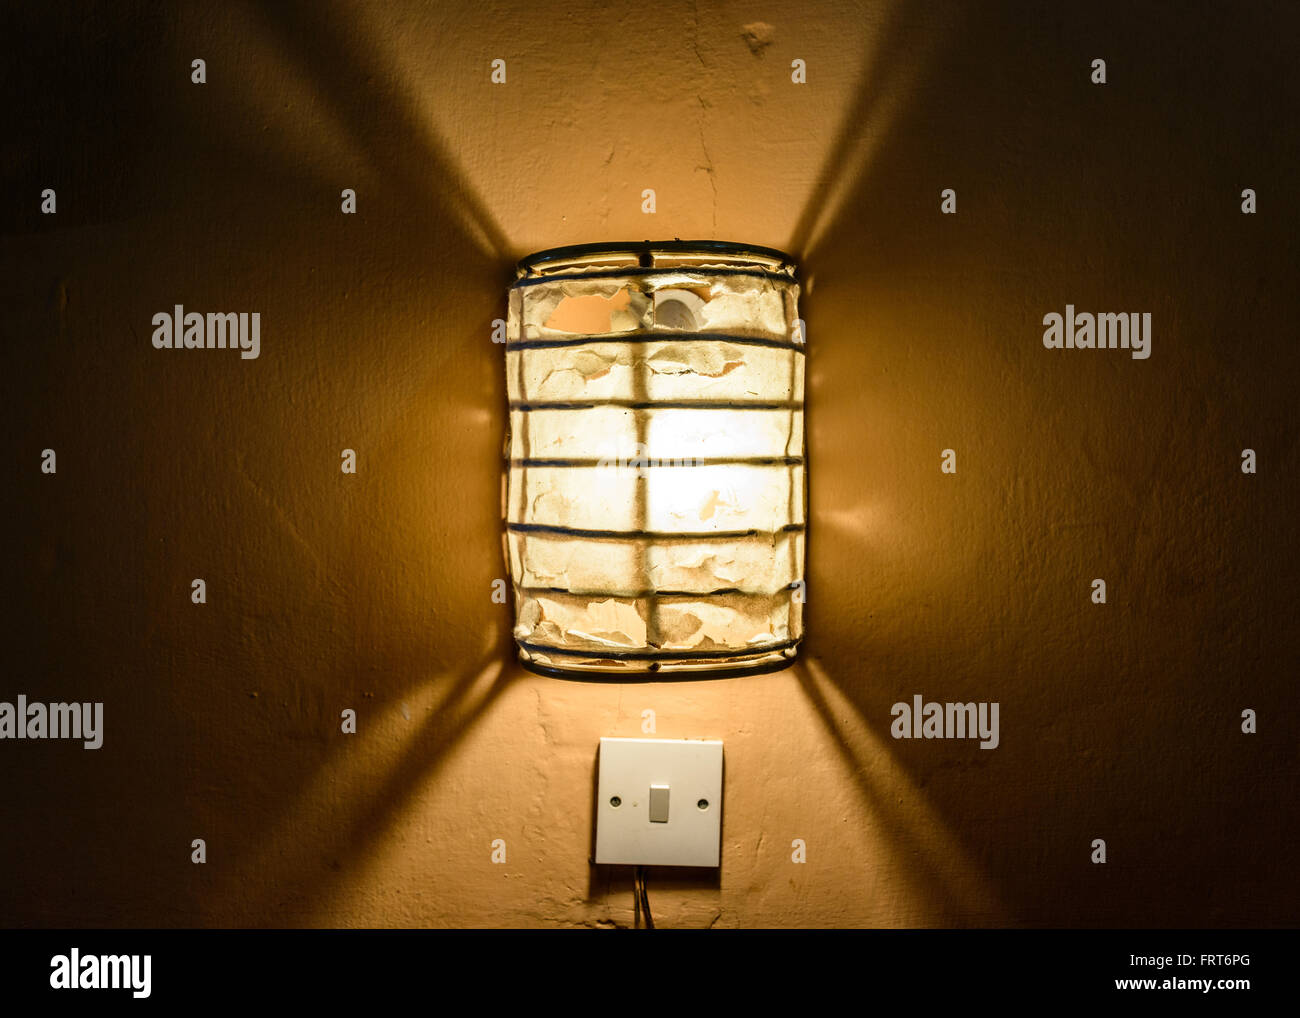 Centered straight on view of illuminated frosted glass flush mount lamp above light switch in dark wall Stock Photo